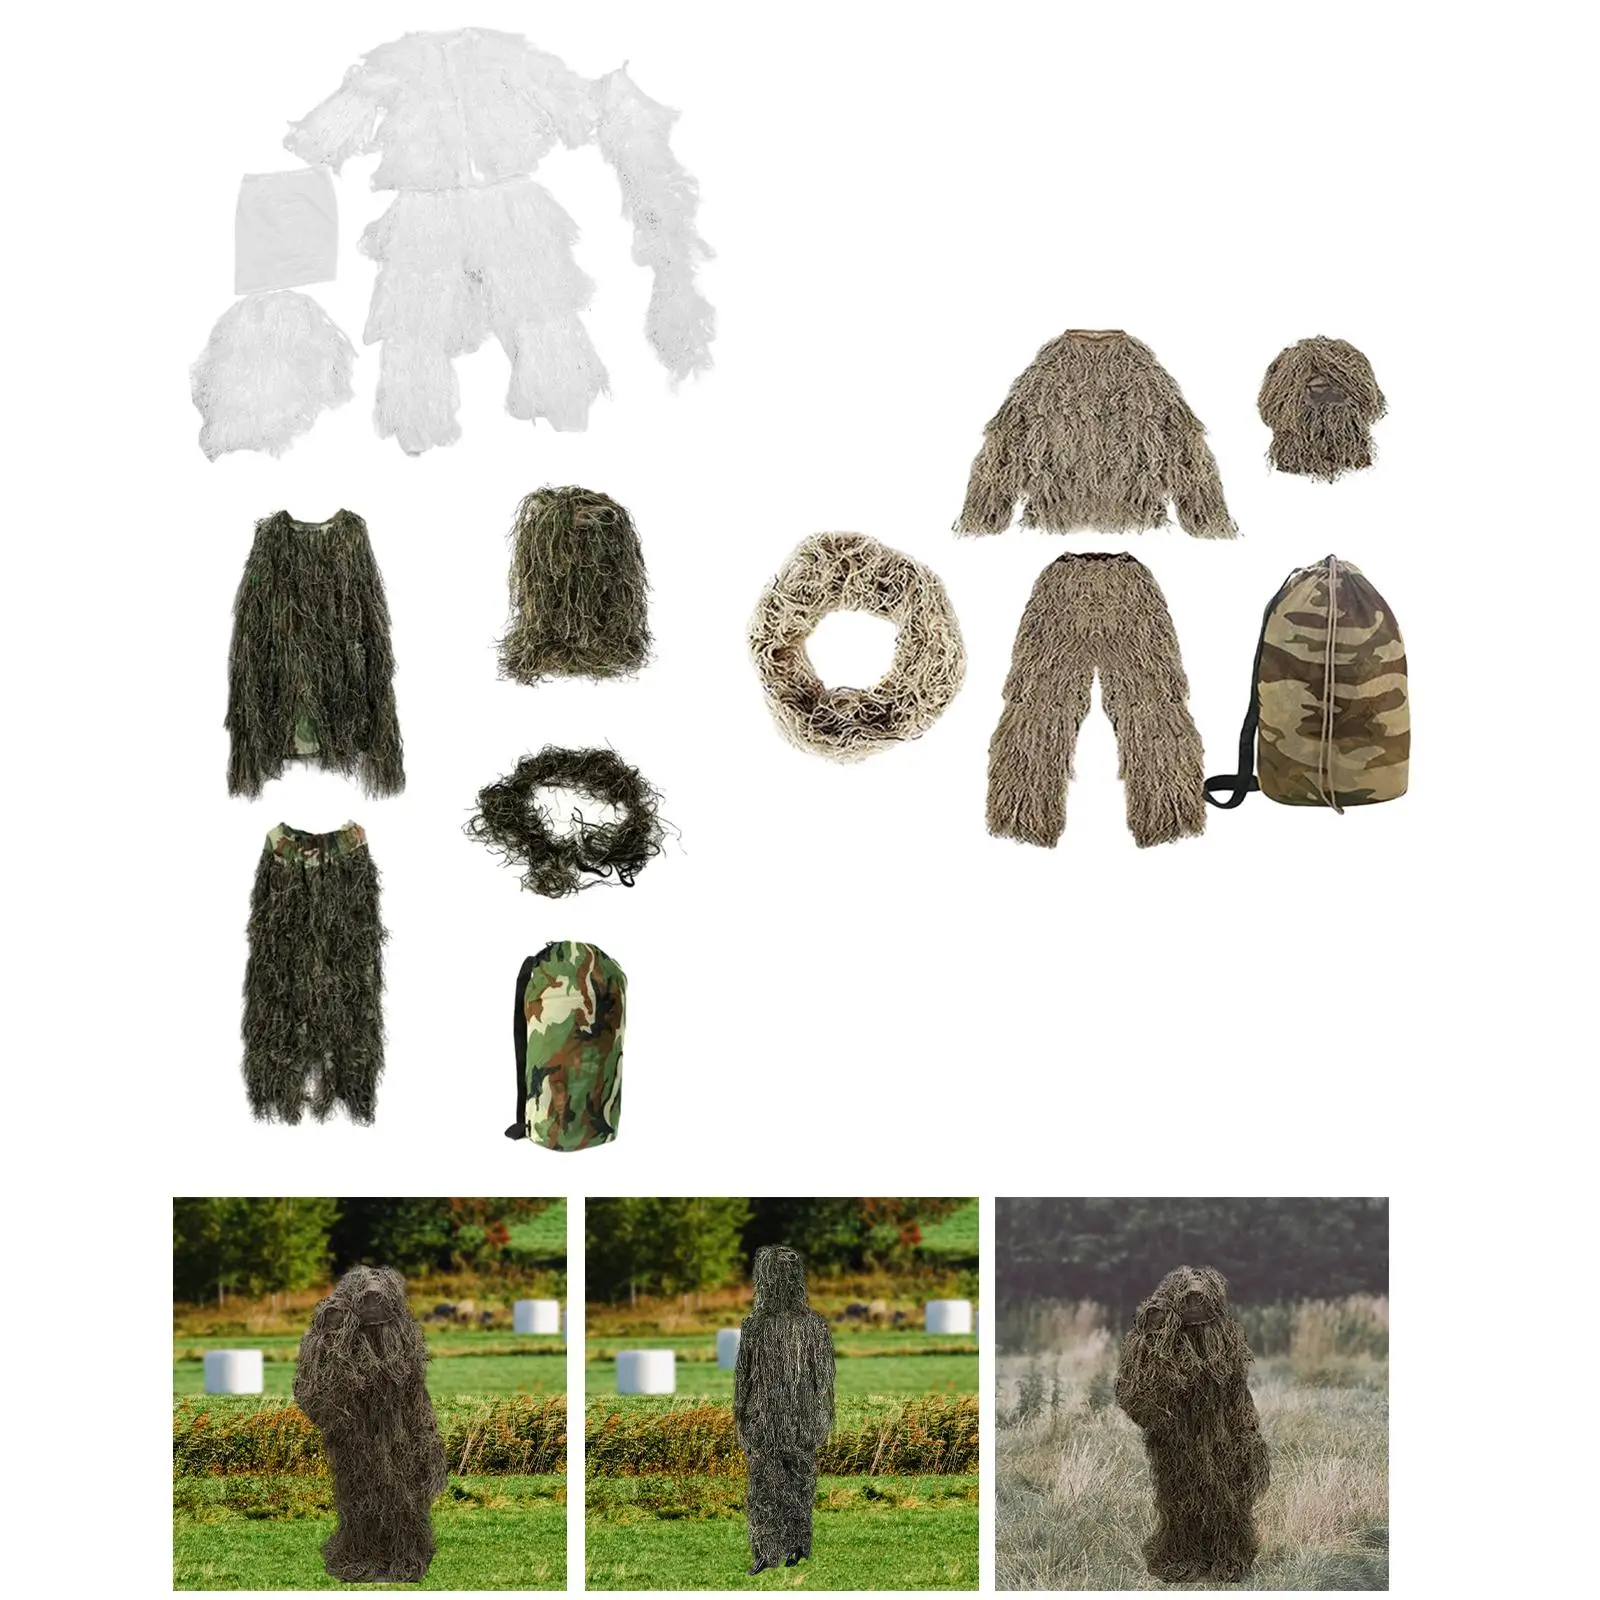 Children Ghillie Suit Lightweight Disguise Clothing for Game Hunting Jungle